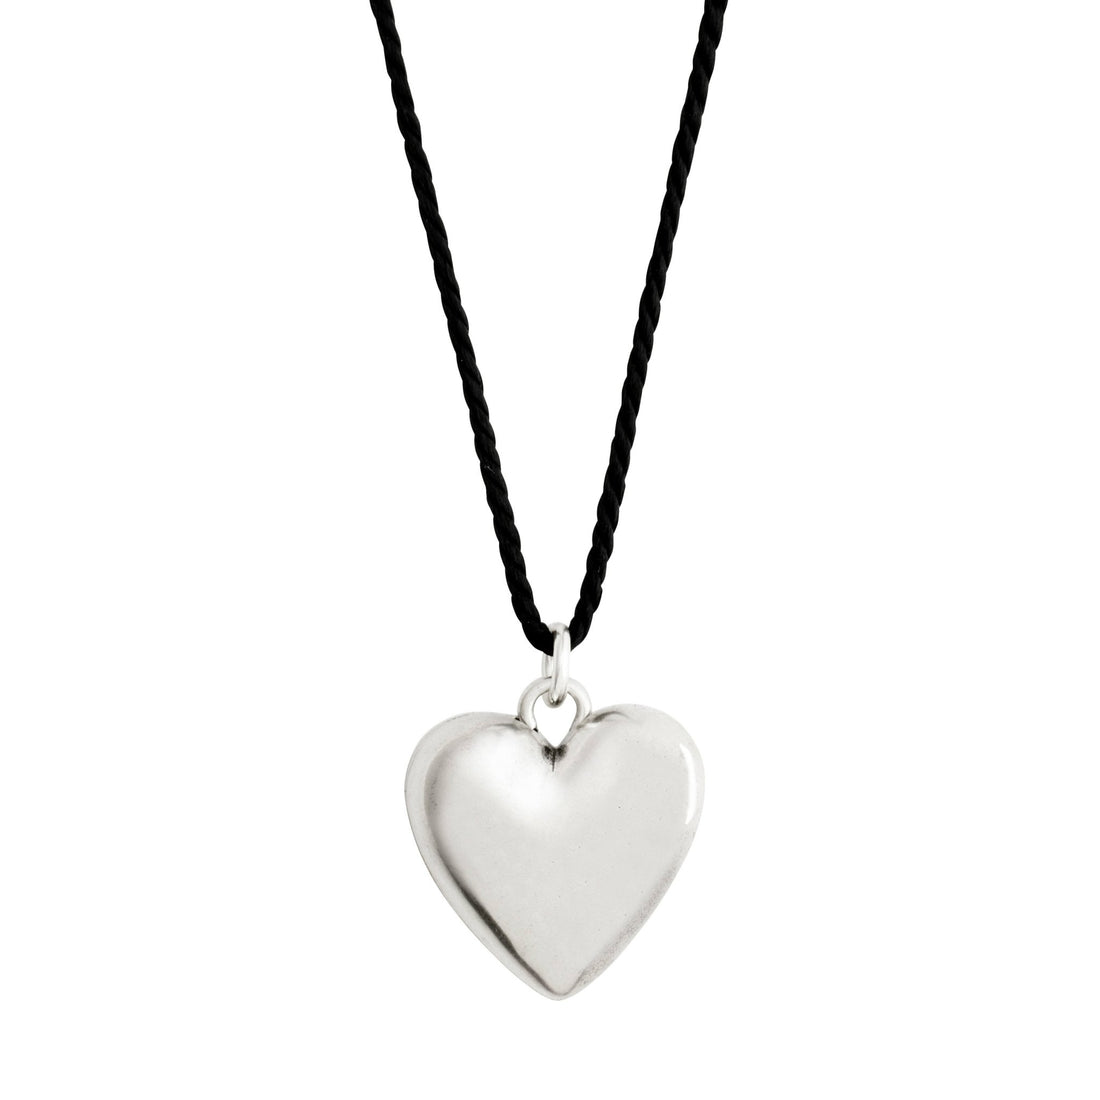 Reflect Recycled Heart Pendant Necklace - PILGRIM